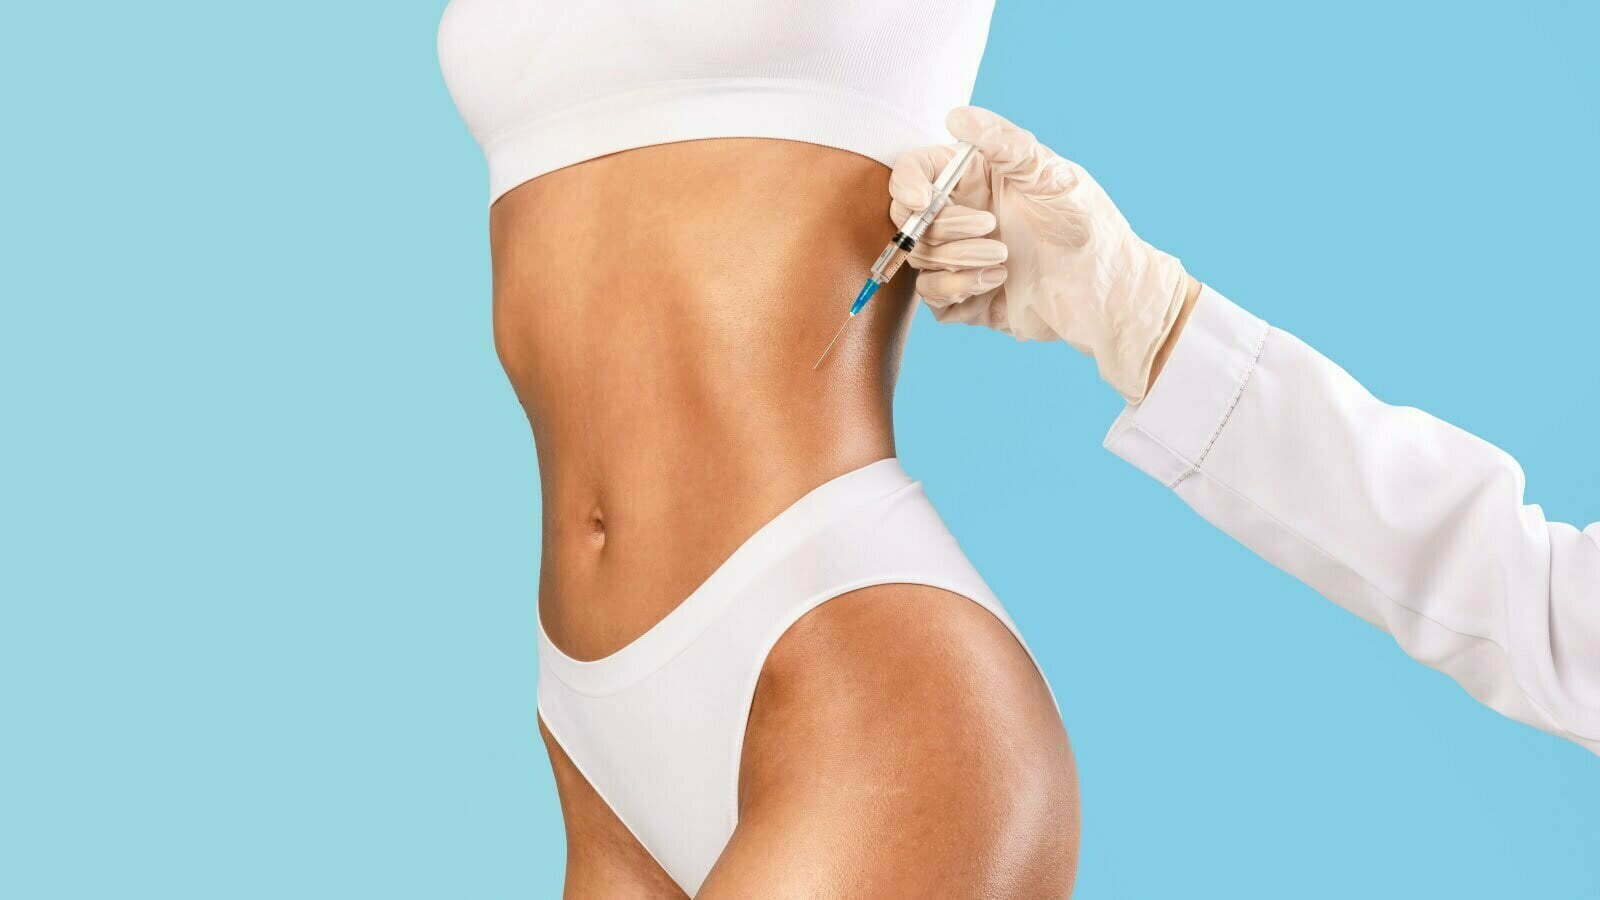 How to Shred Your Muffin Top Without Surgery - Zcosmetic Health